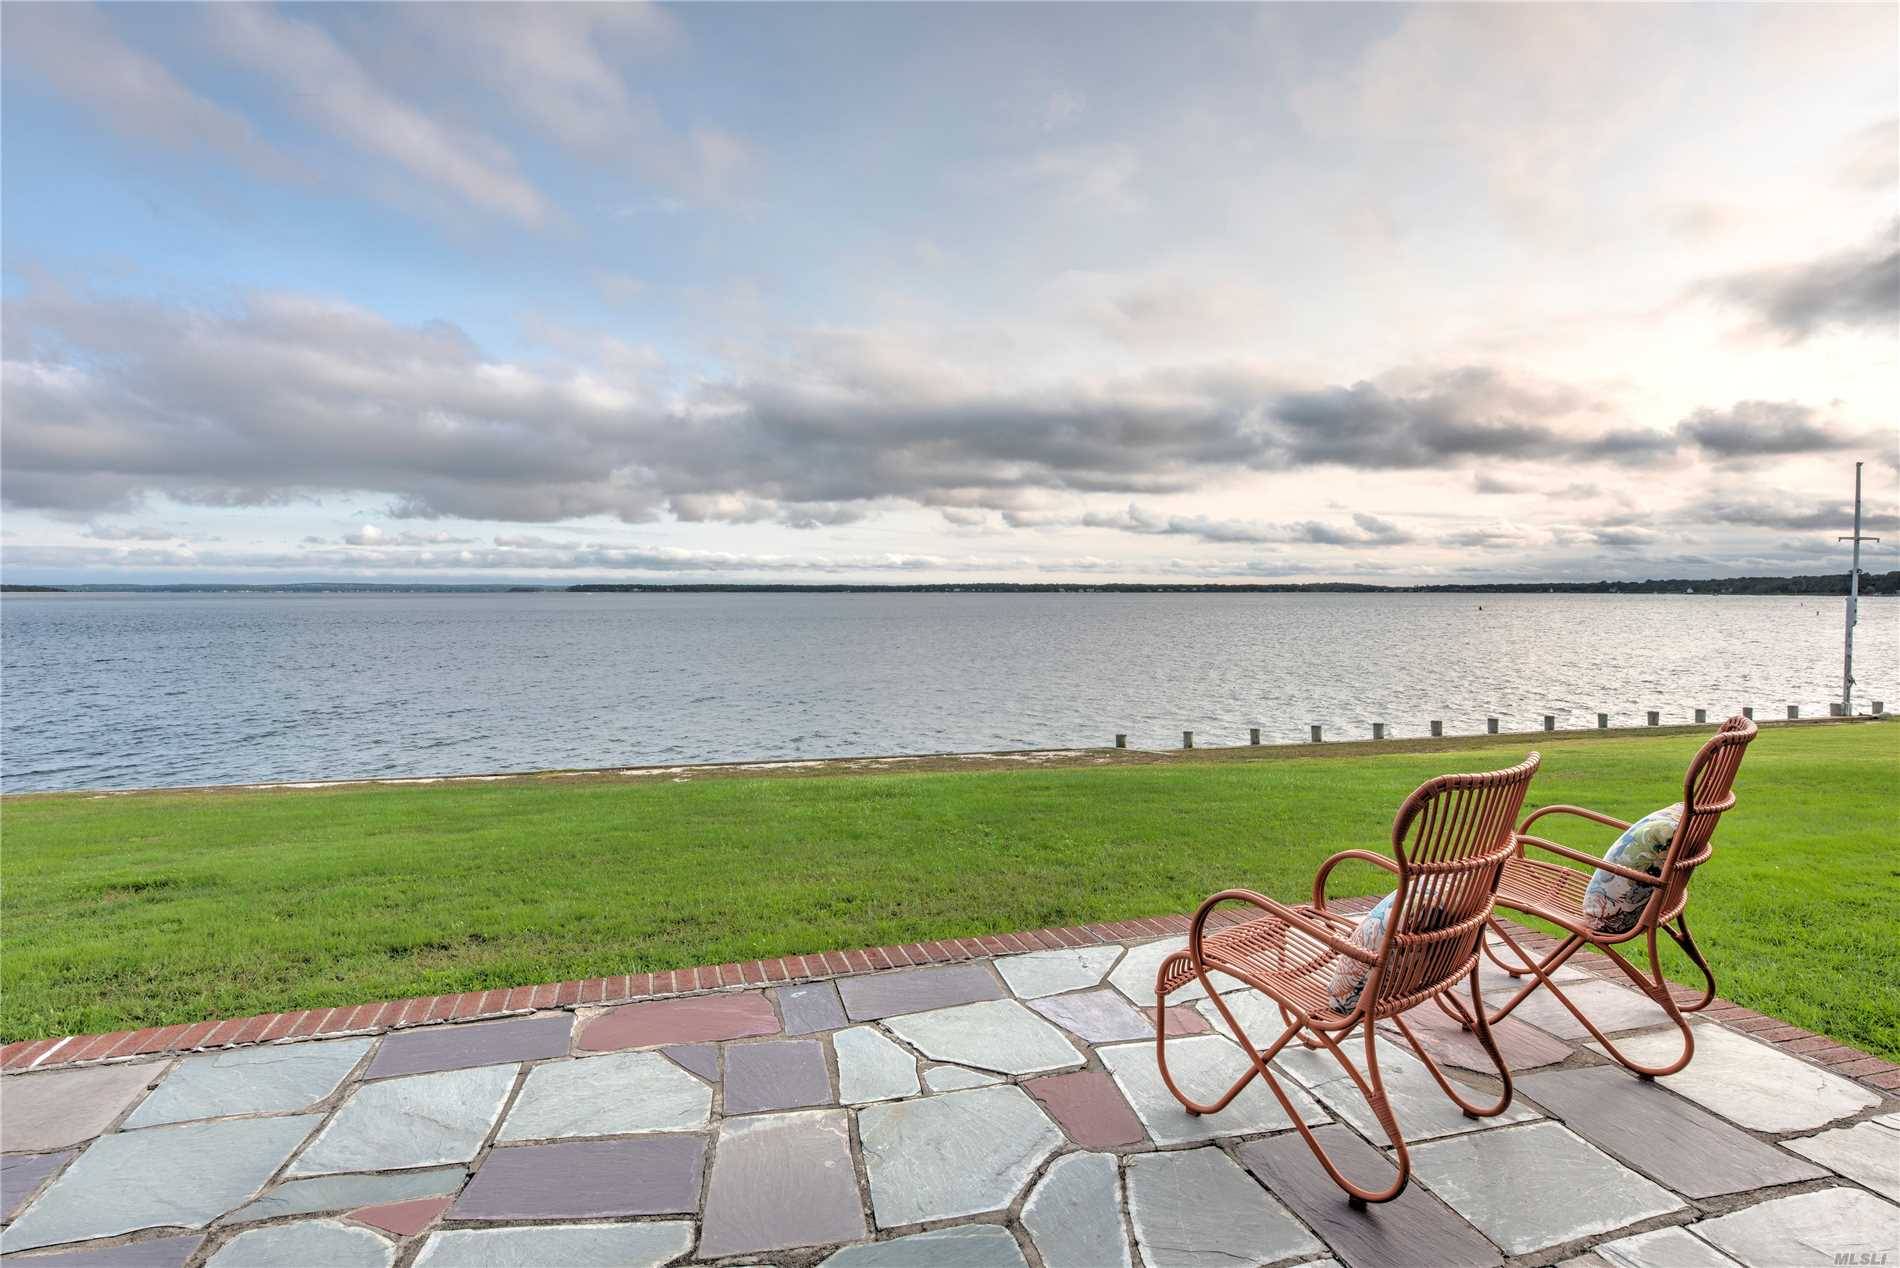 Unique Opportunity To Own A Home In Southold Directly On Peconic Bay With Waterviews To Shelter Island & Beyond.